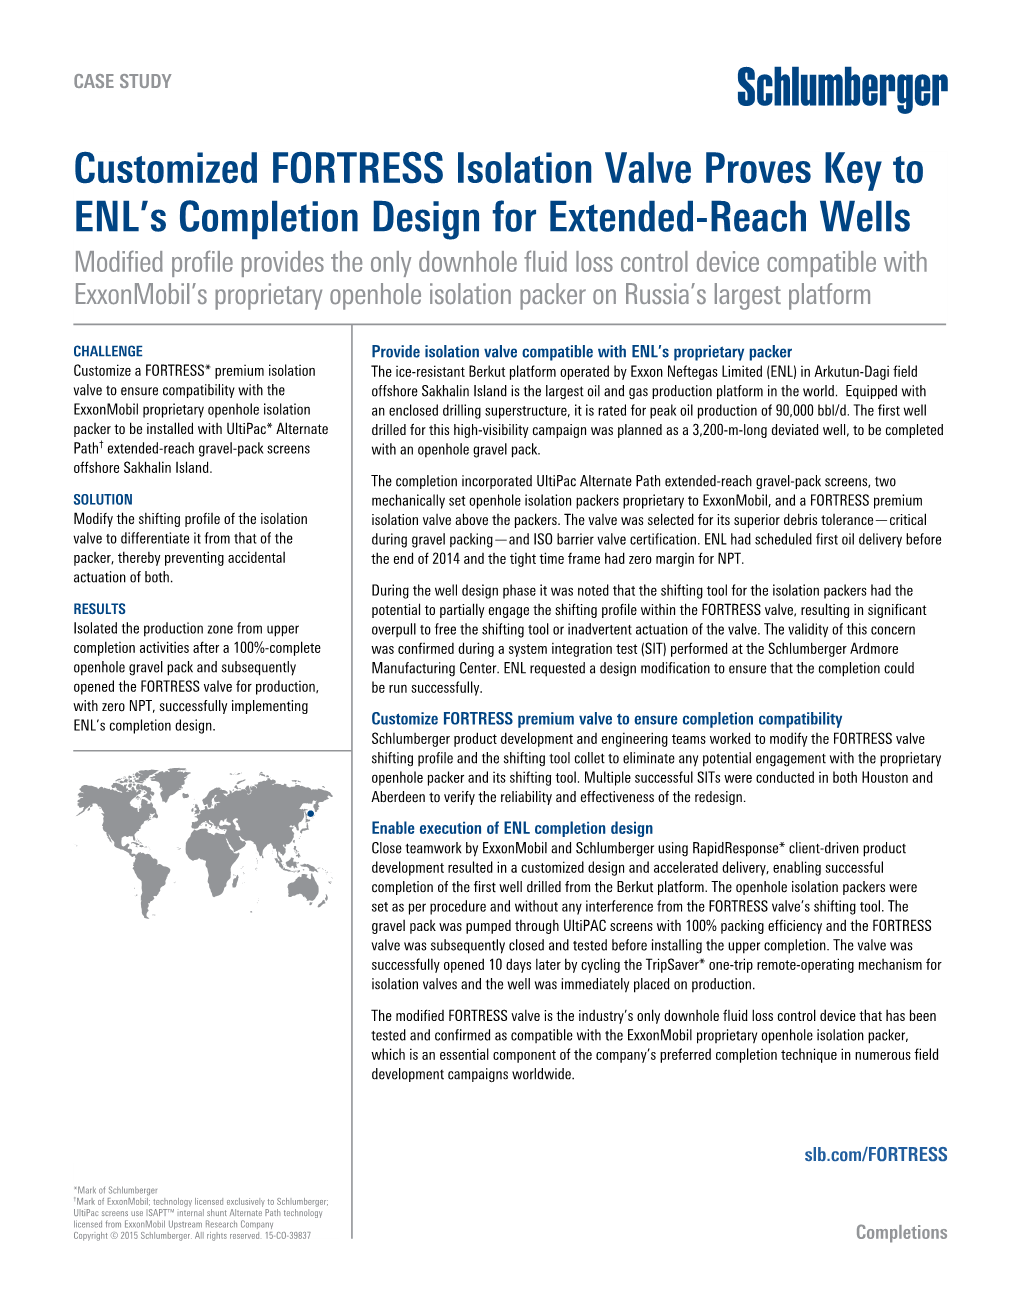 Customized FORTRESS Isolation Valve Proves Key to ENL's